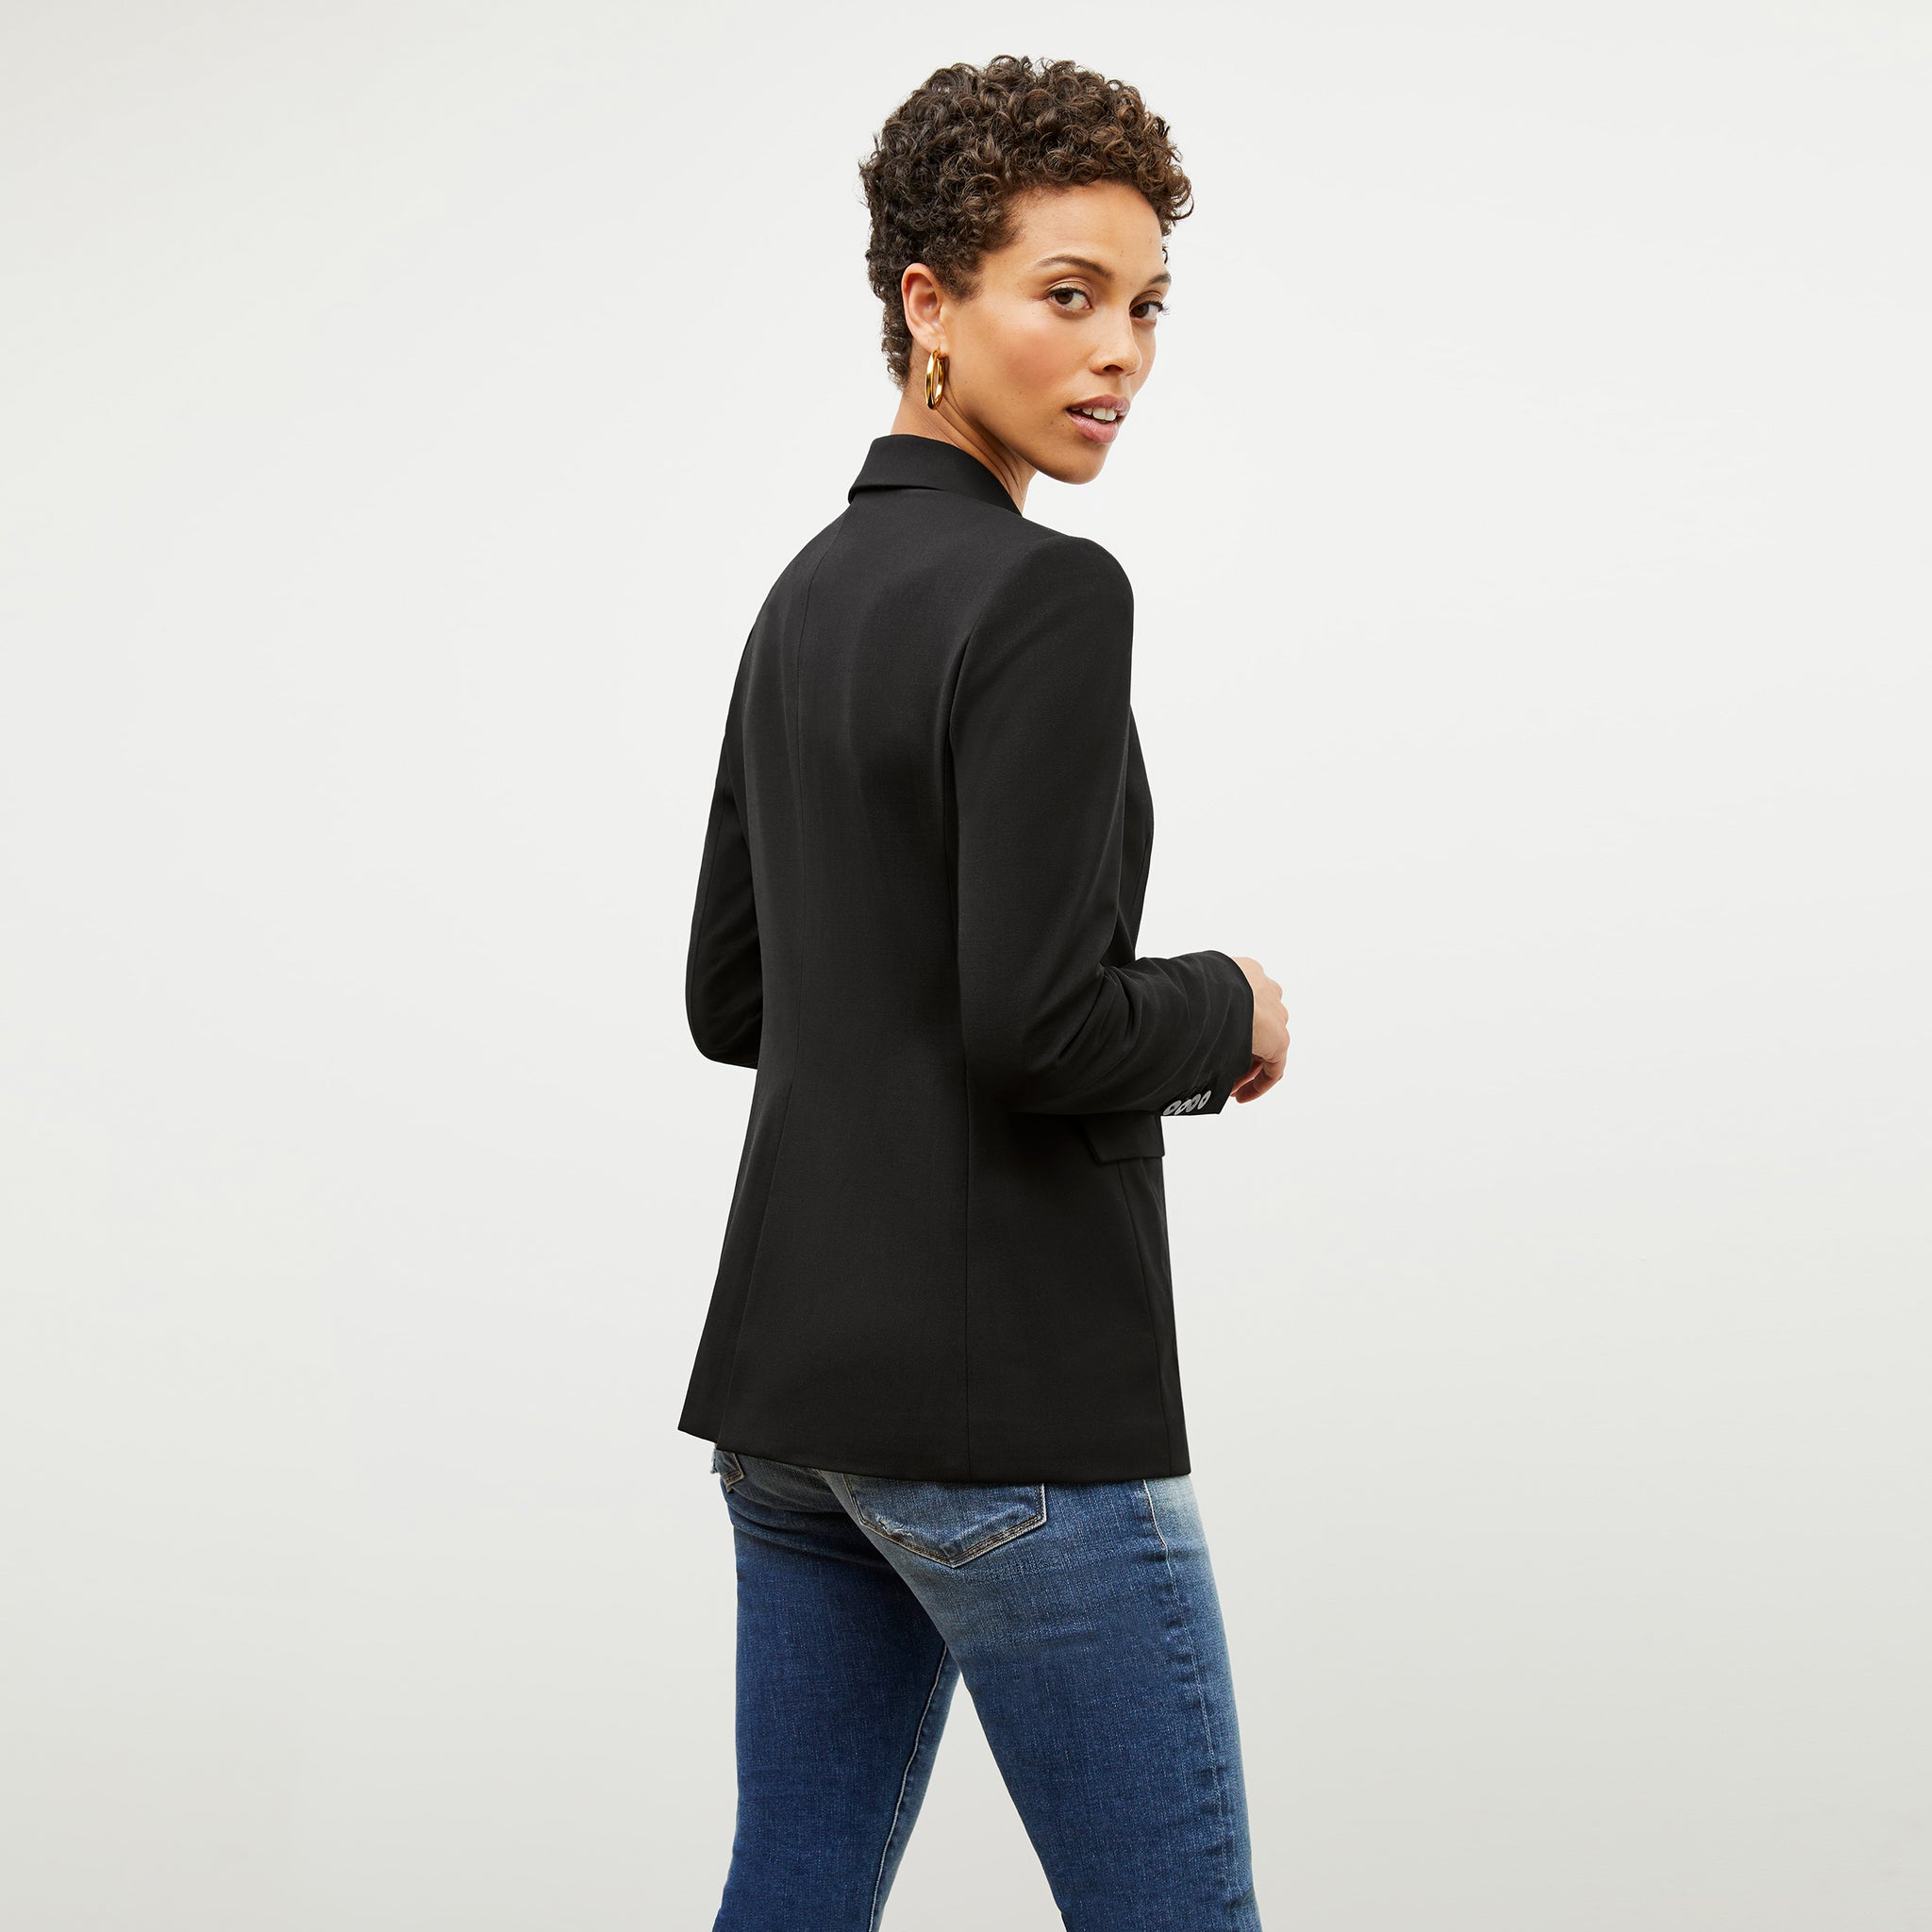 Back image of a woman wearing the kati jacket in black